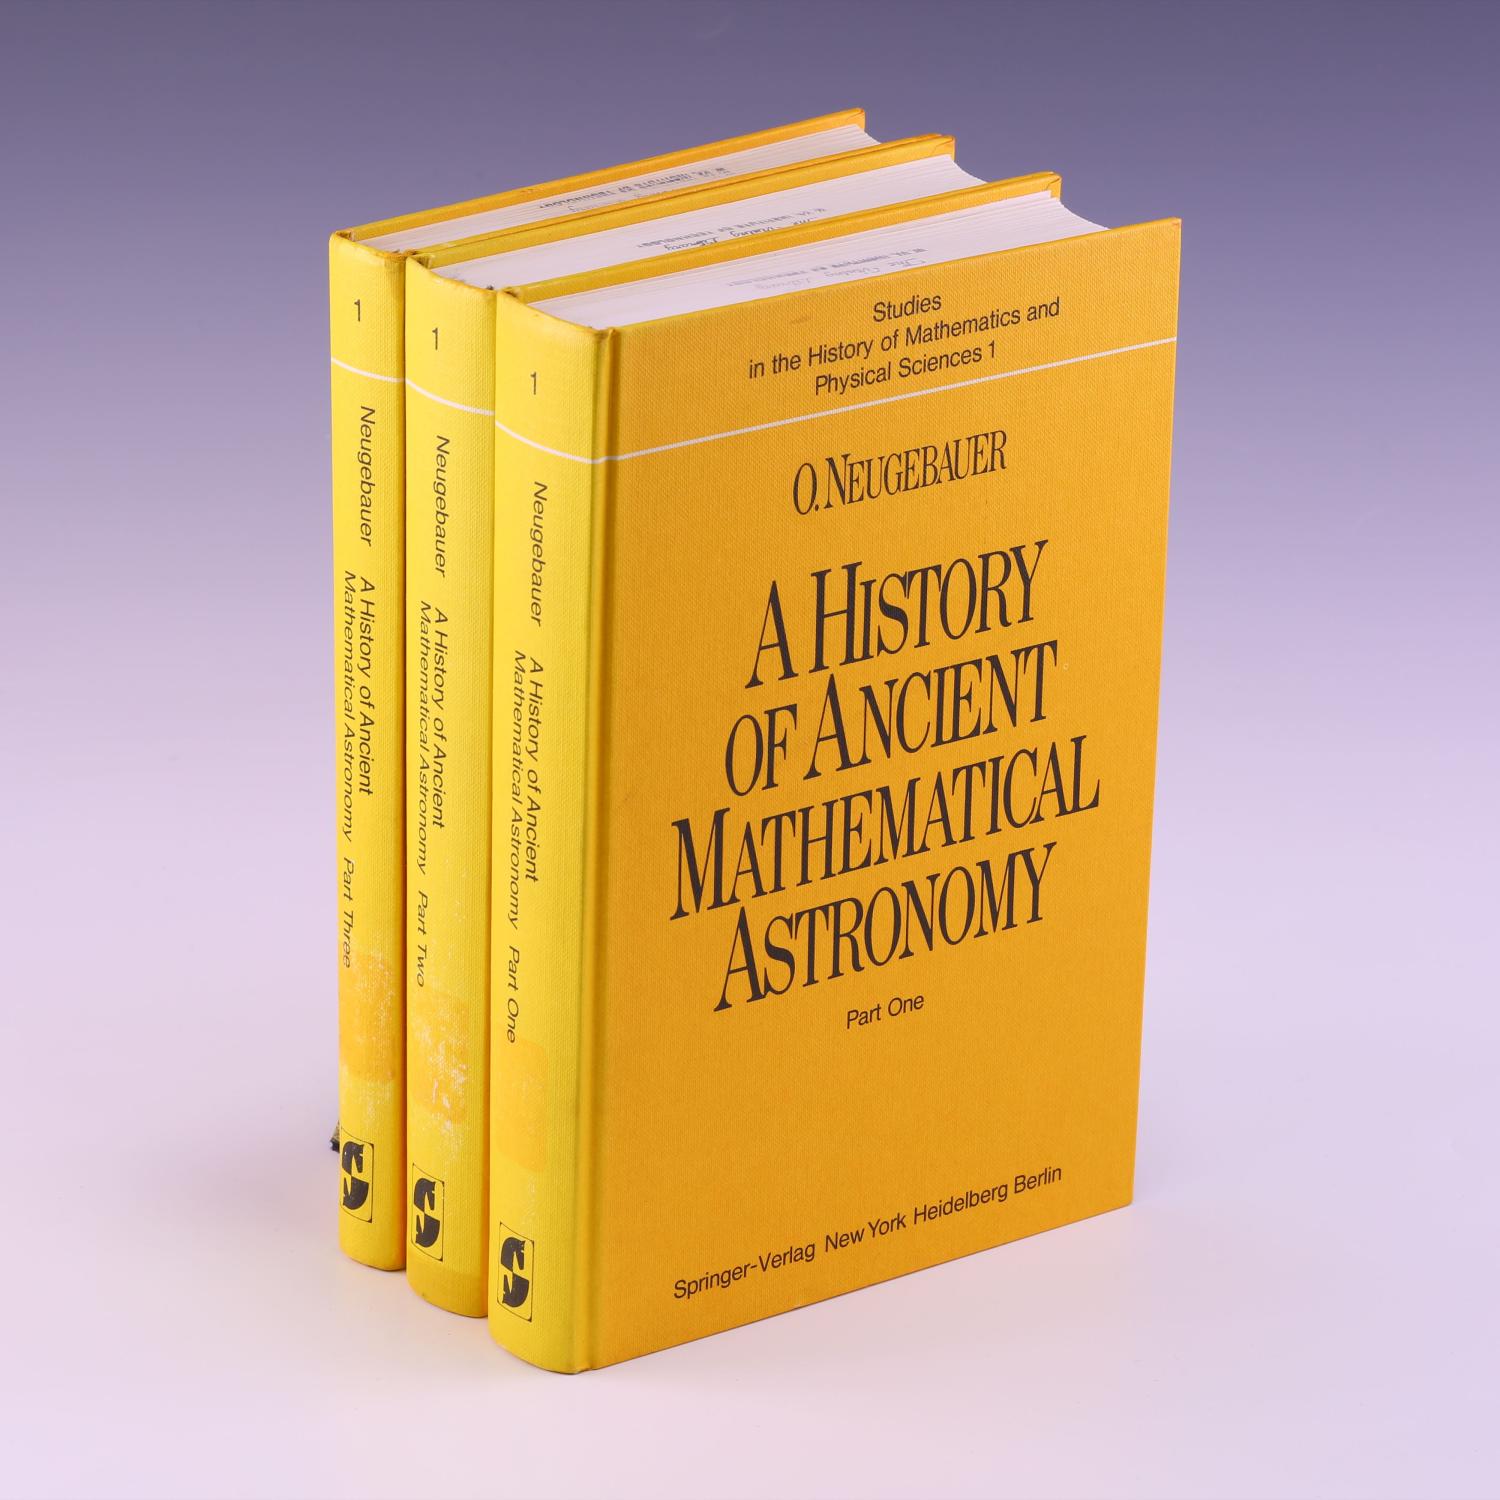 History of Ancient Mathematical Astronomy (Studies in the History of Mathematics and Physical Sciences)